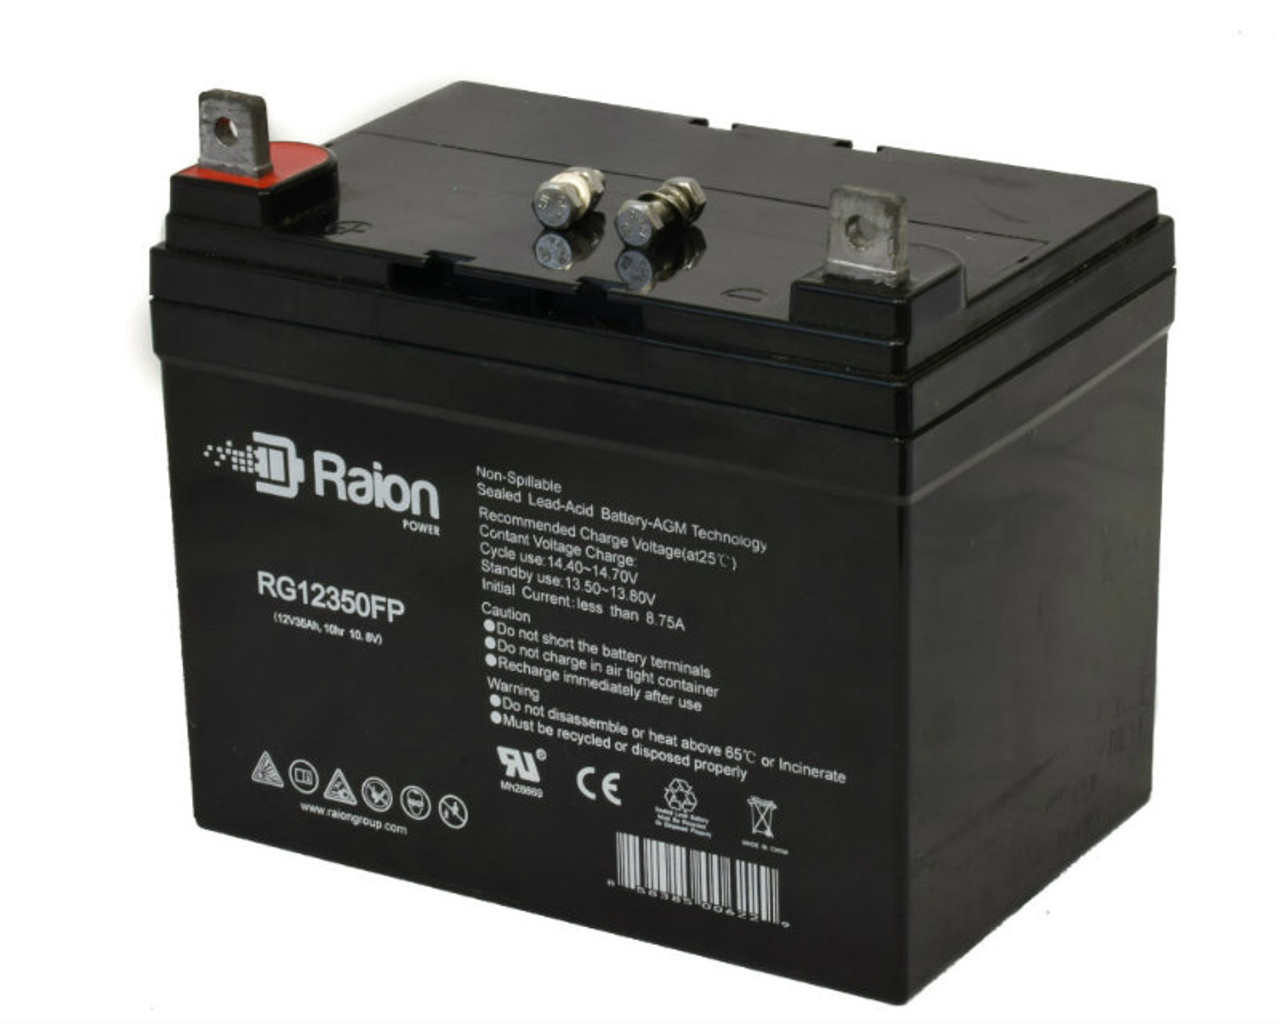 Raion Power Replacement 12V 35Ah RG12350FP Battery for Leoch DJW12-33